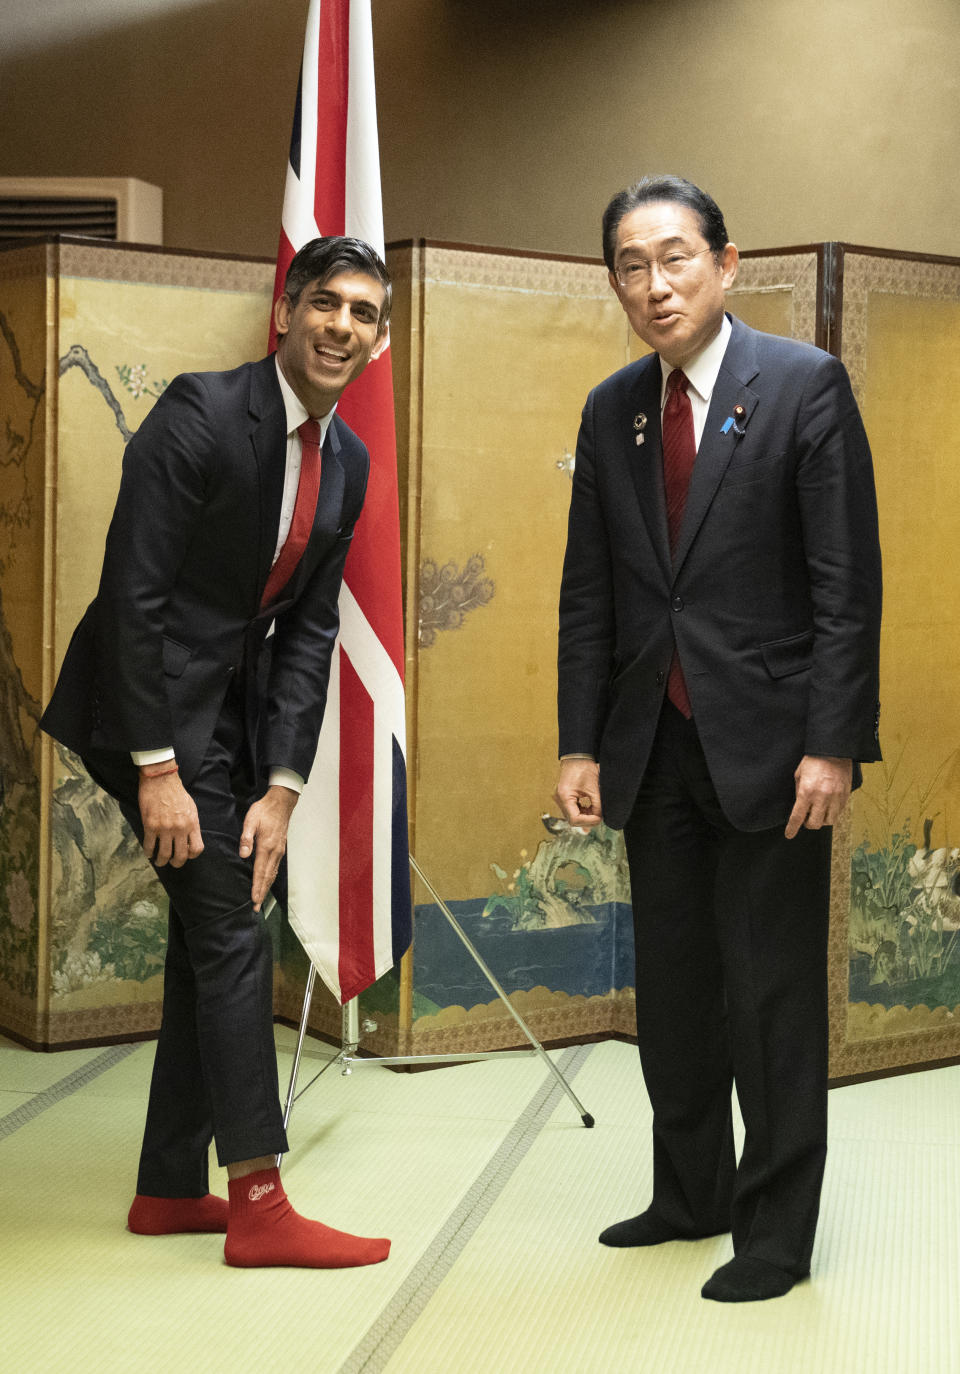 British Prime Minister Rishi Sunak shows off his socks to Japanese Prime Minister Fumio Kishida, which has the name of Kishida's favorite baseball team, Hiroshima Toyo Carp, on them, during their bilateral meeting in Hiroshima ahead of the G7 Summit in Japan, Thursday May 18, 2023. (Stefan Rousseau, Pool via AP)